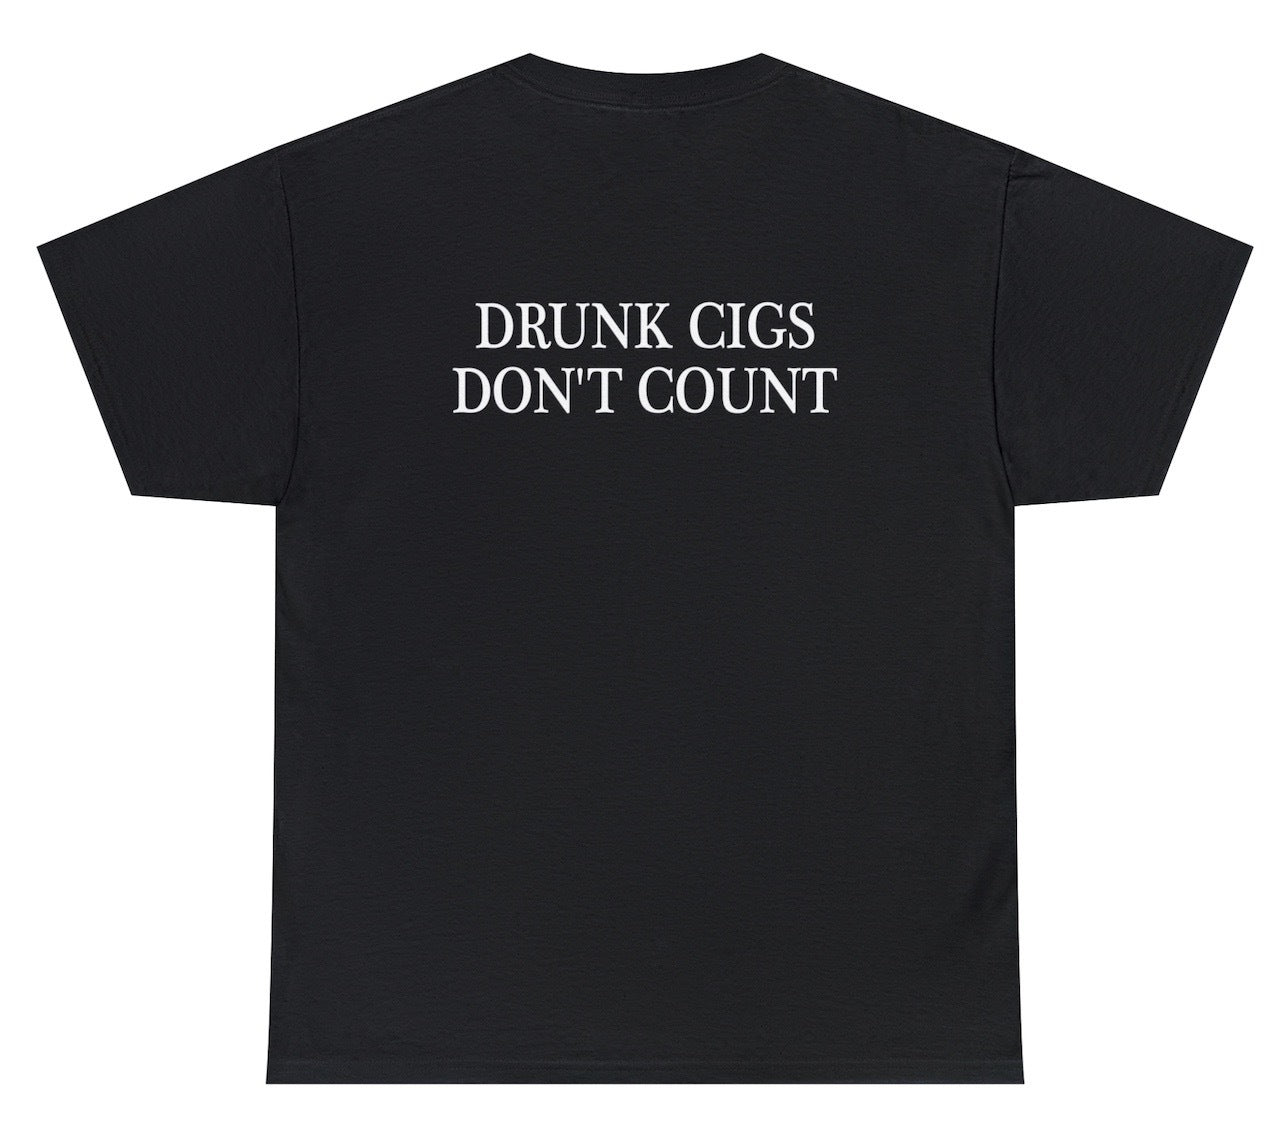 Drunk Cigs Don't Count Tee